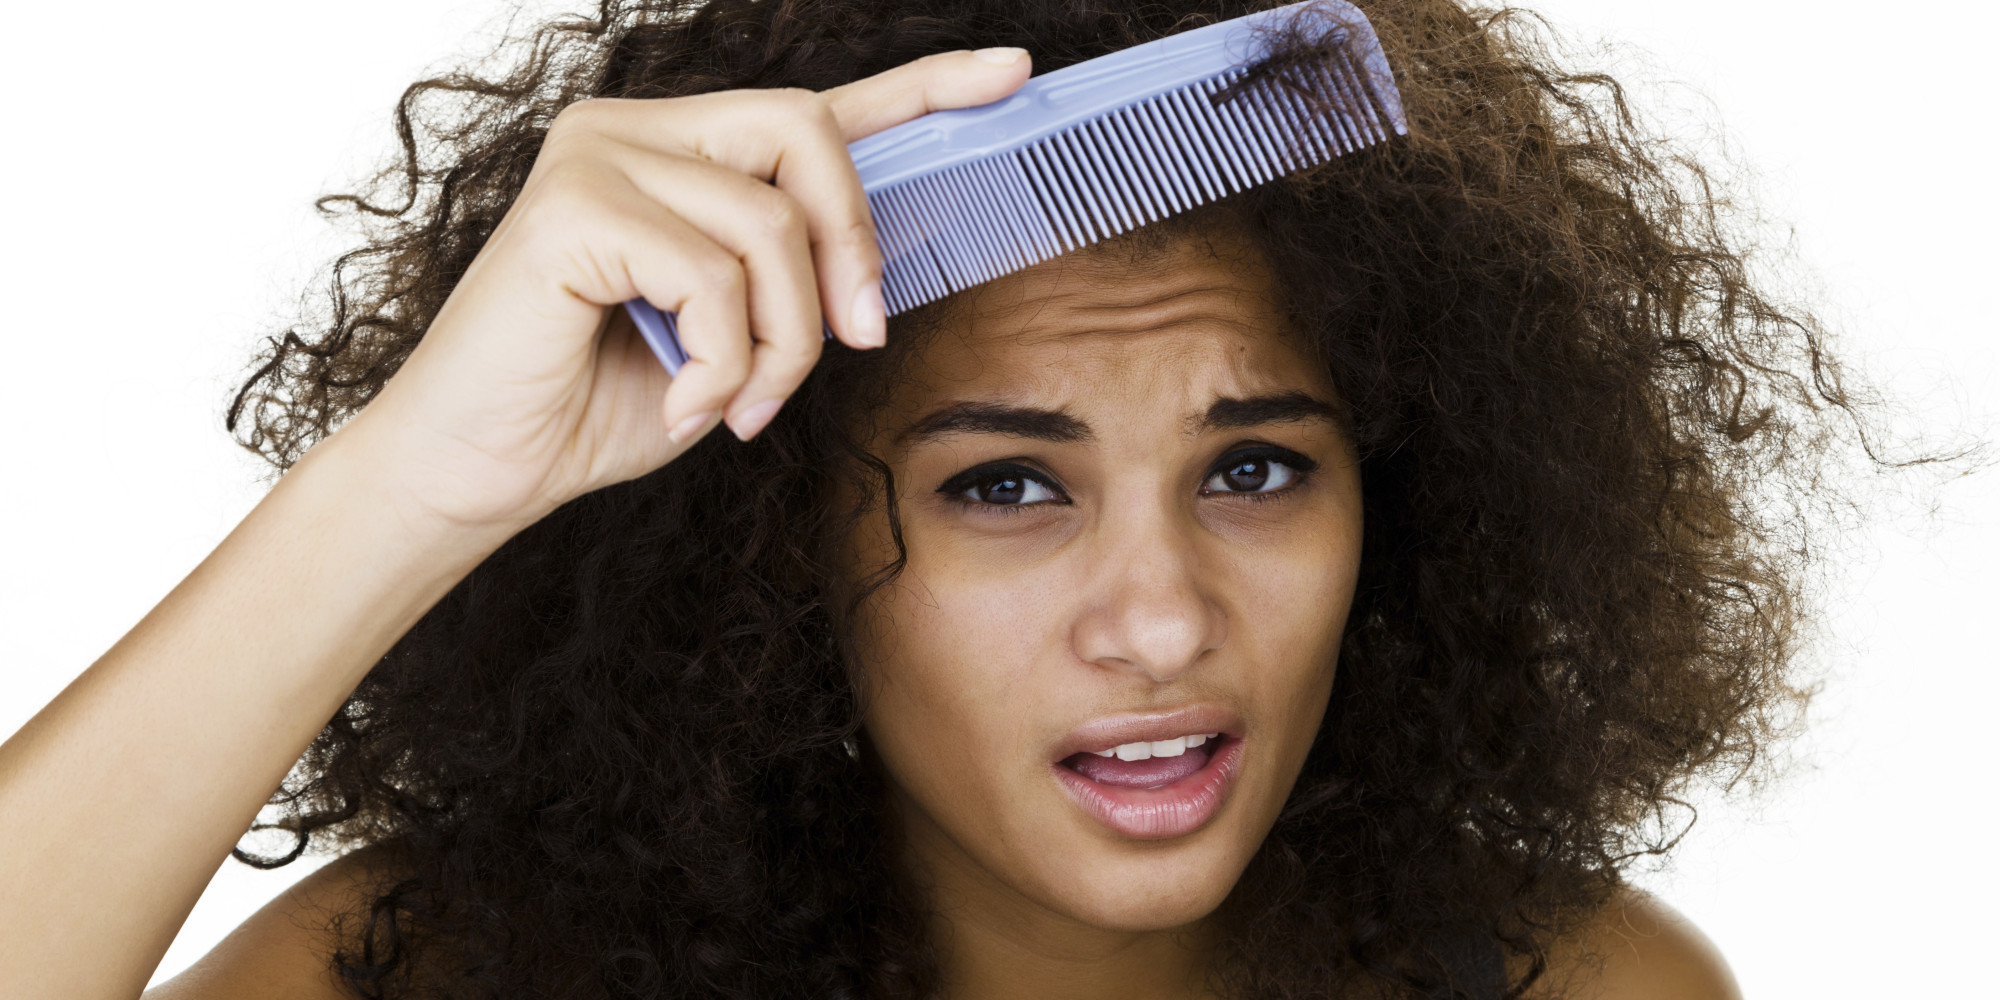 According to dermatologist, the main reason for your frizzy hair is because...